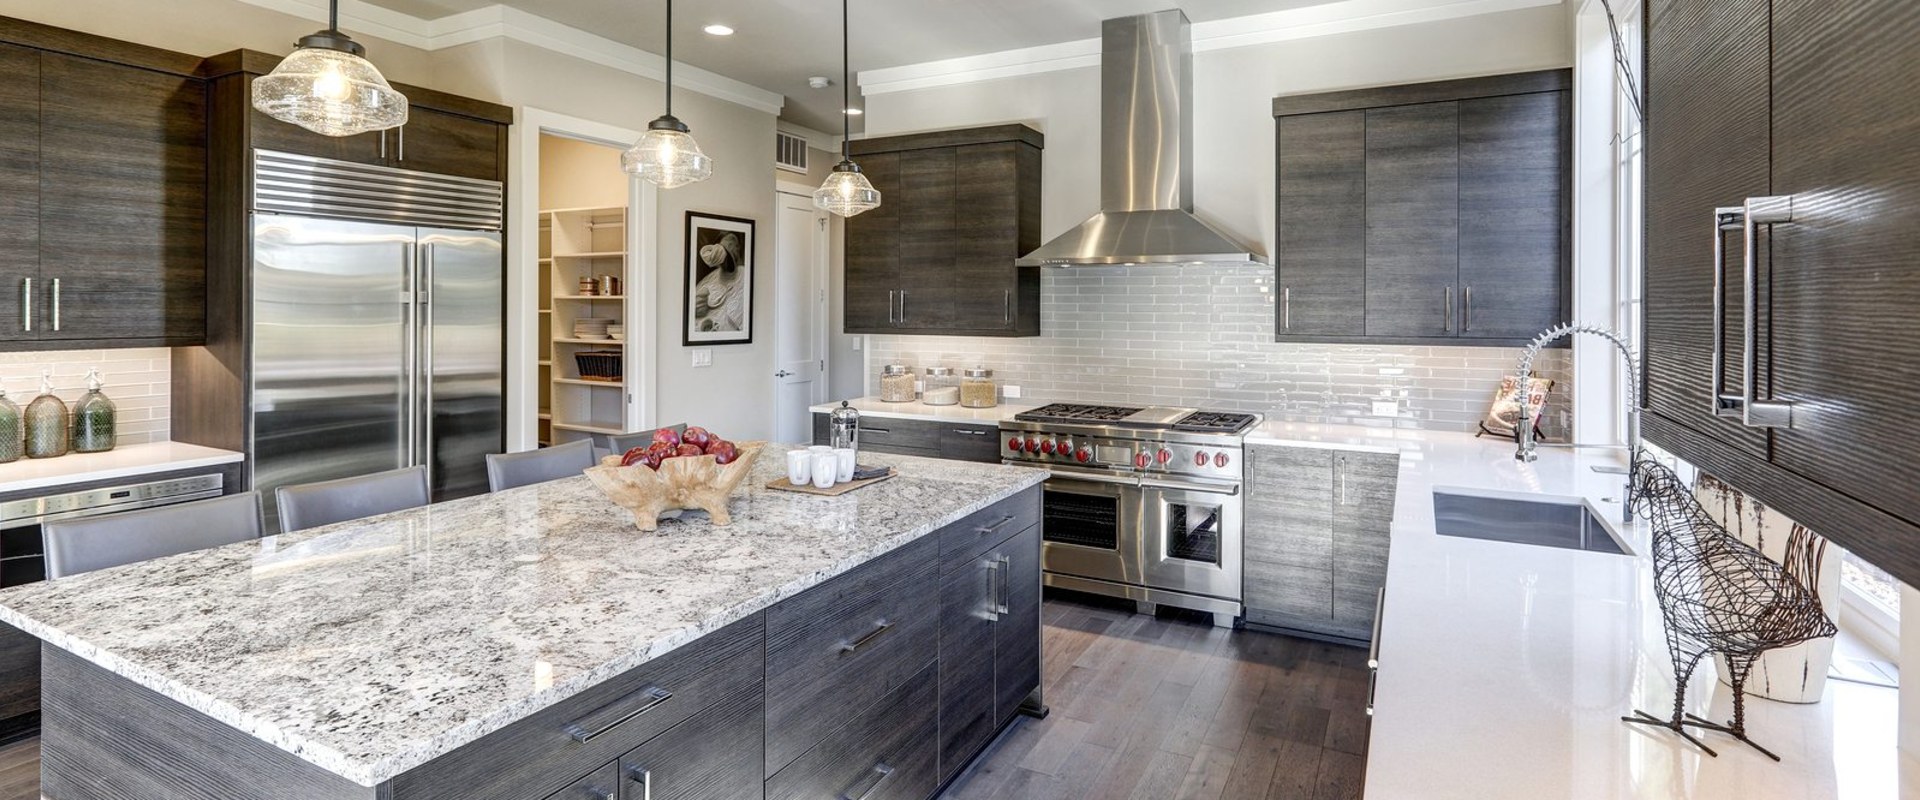 Choosing the Right Countertop Material for Your Home